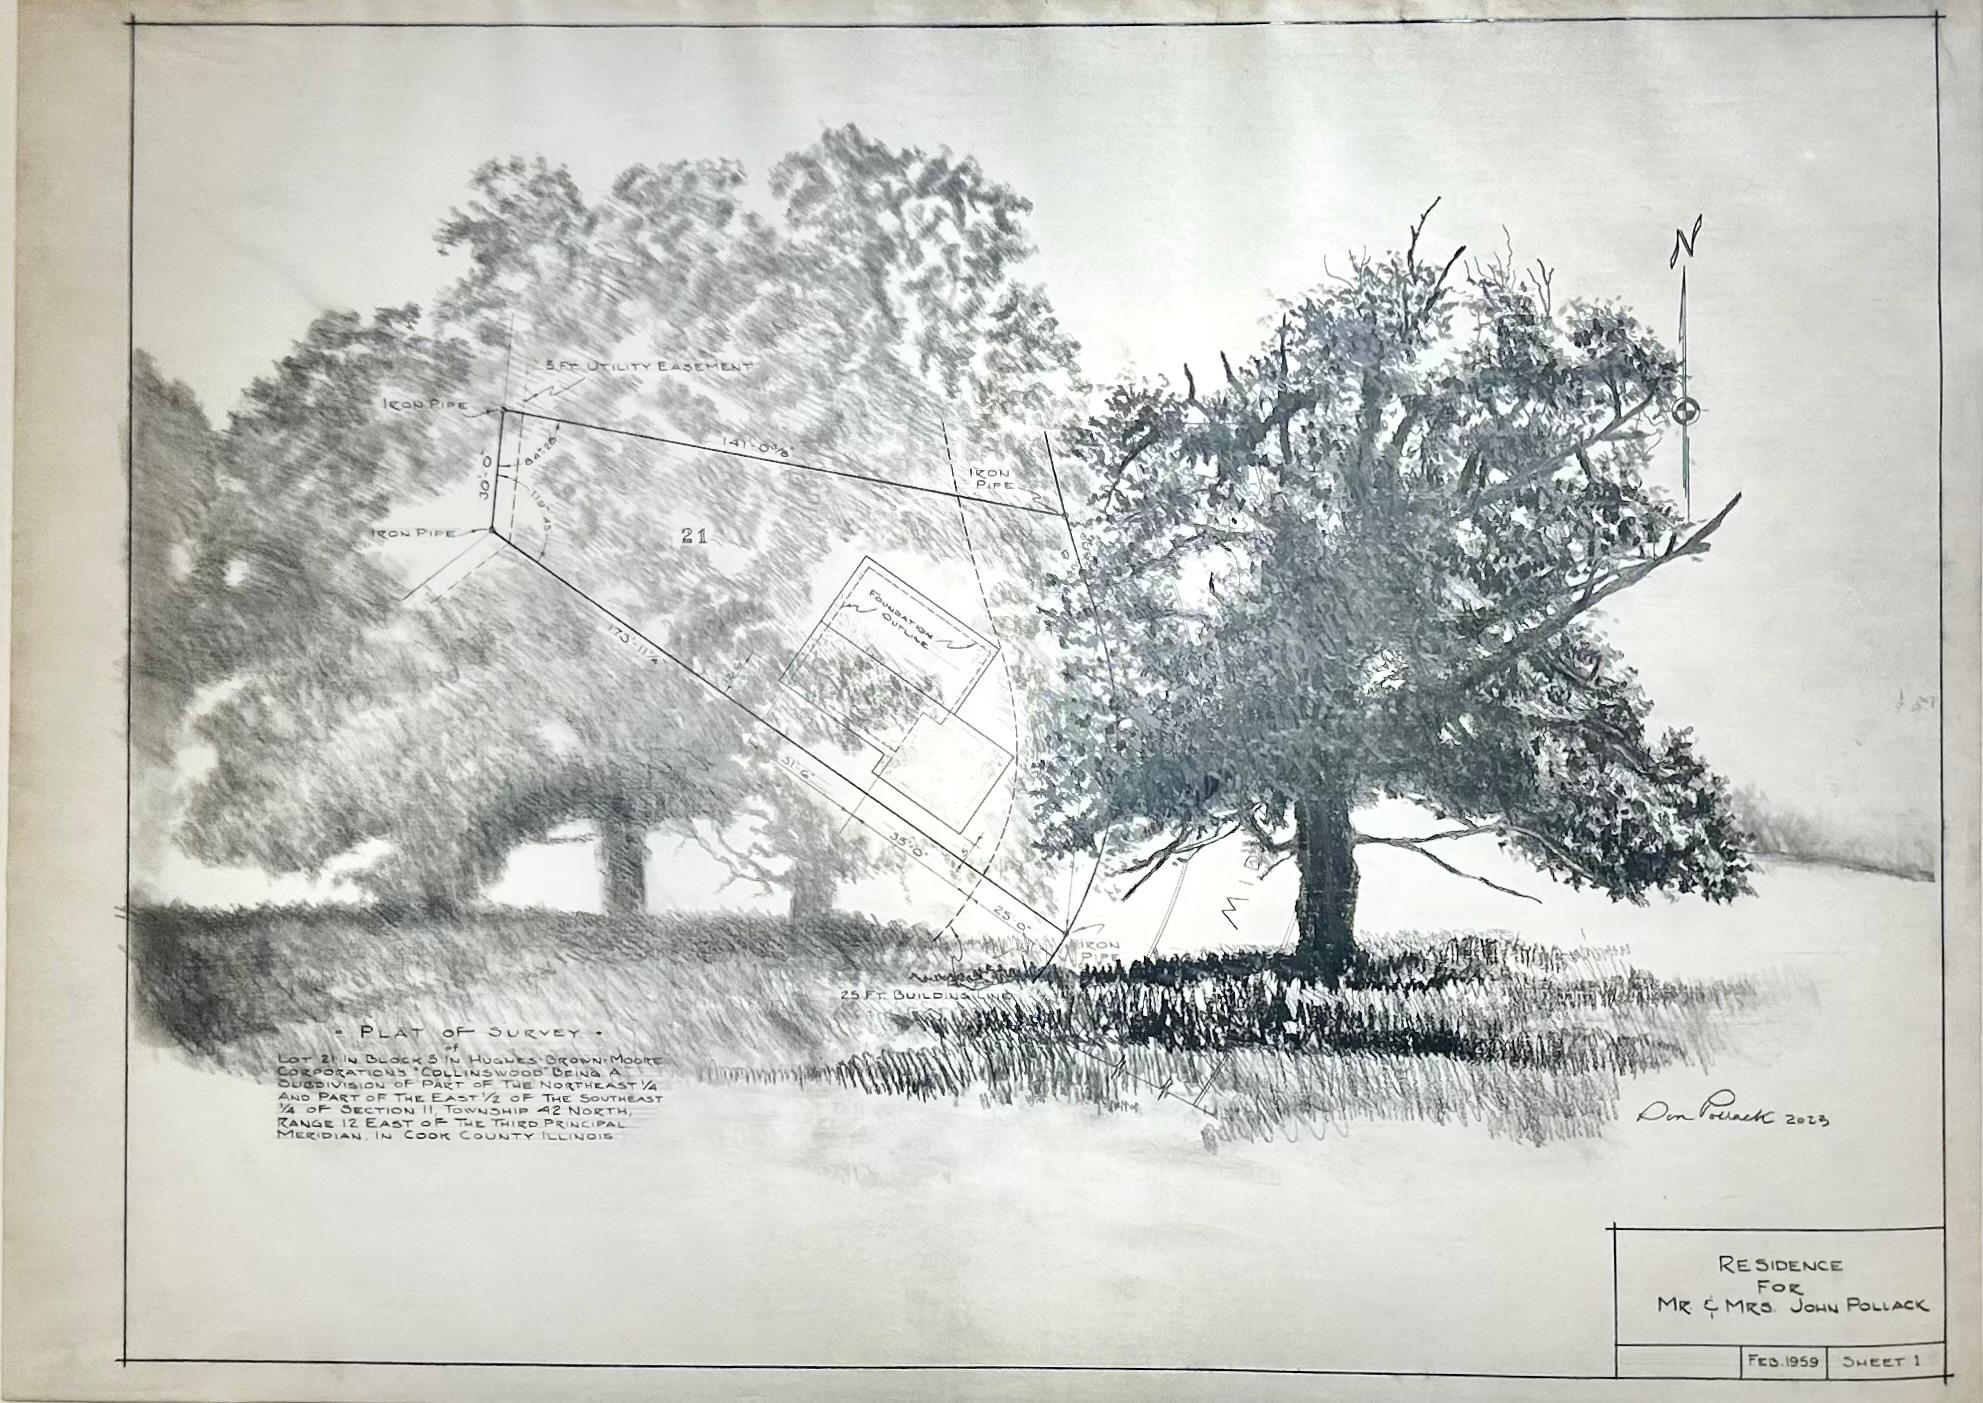 Don Pollack Animal Art - Plat Survey - Trees in Graphite on Antique Architectural Drawings 